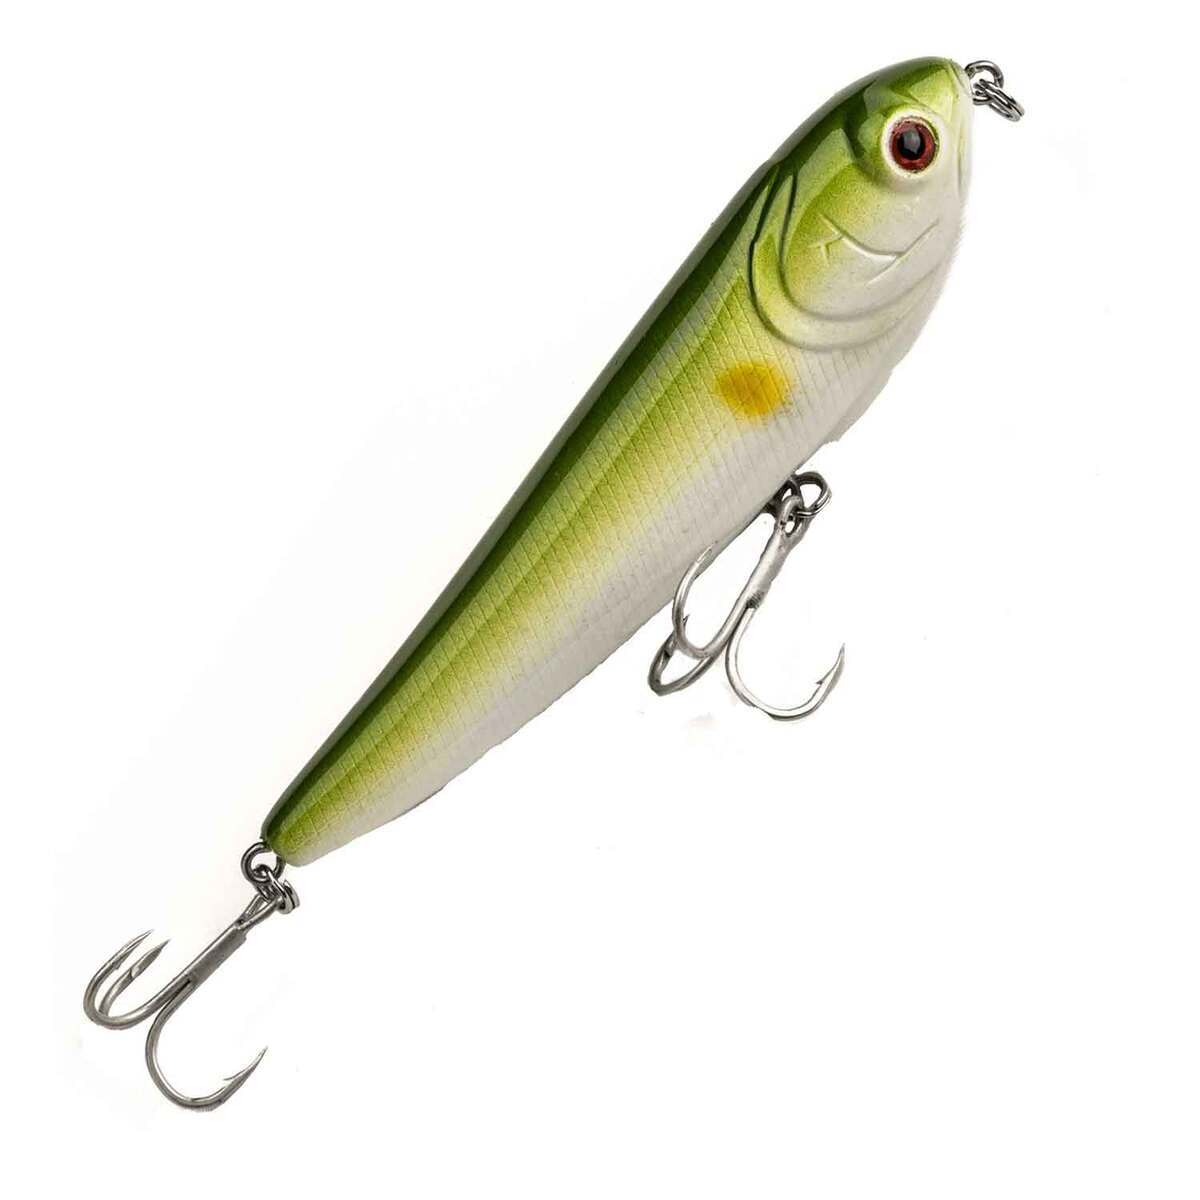 Castaic The Patriot Topwater Bait - Pearl Shad, 1/2oz, 4in